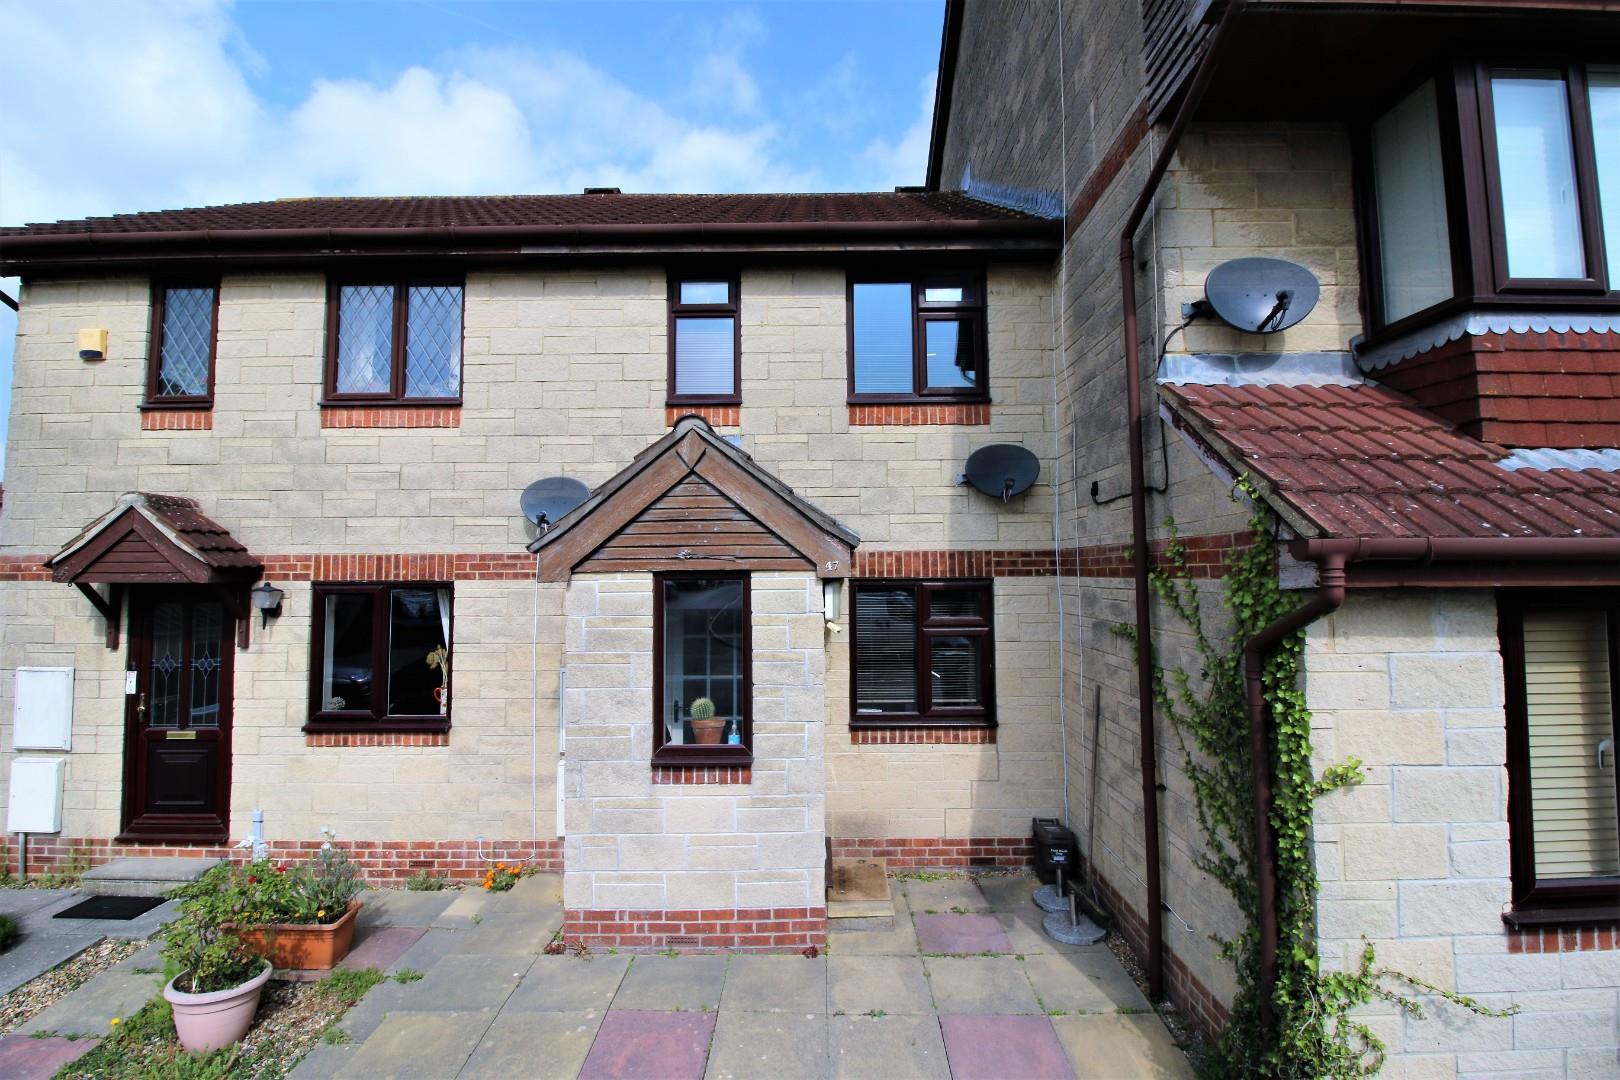 Extended home in central Yatton